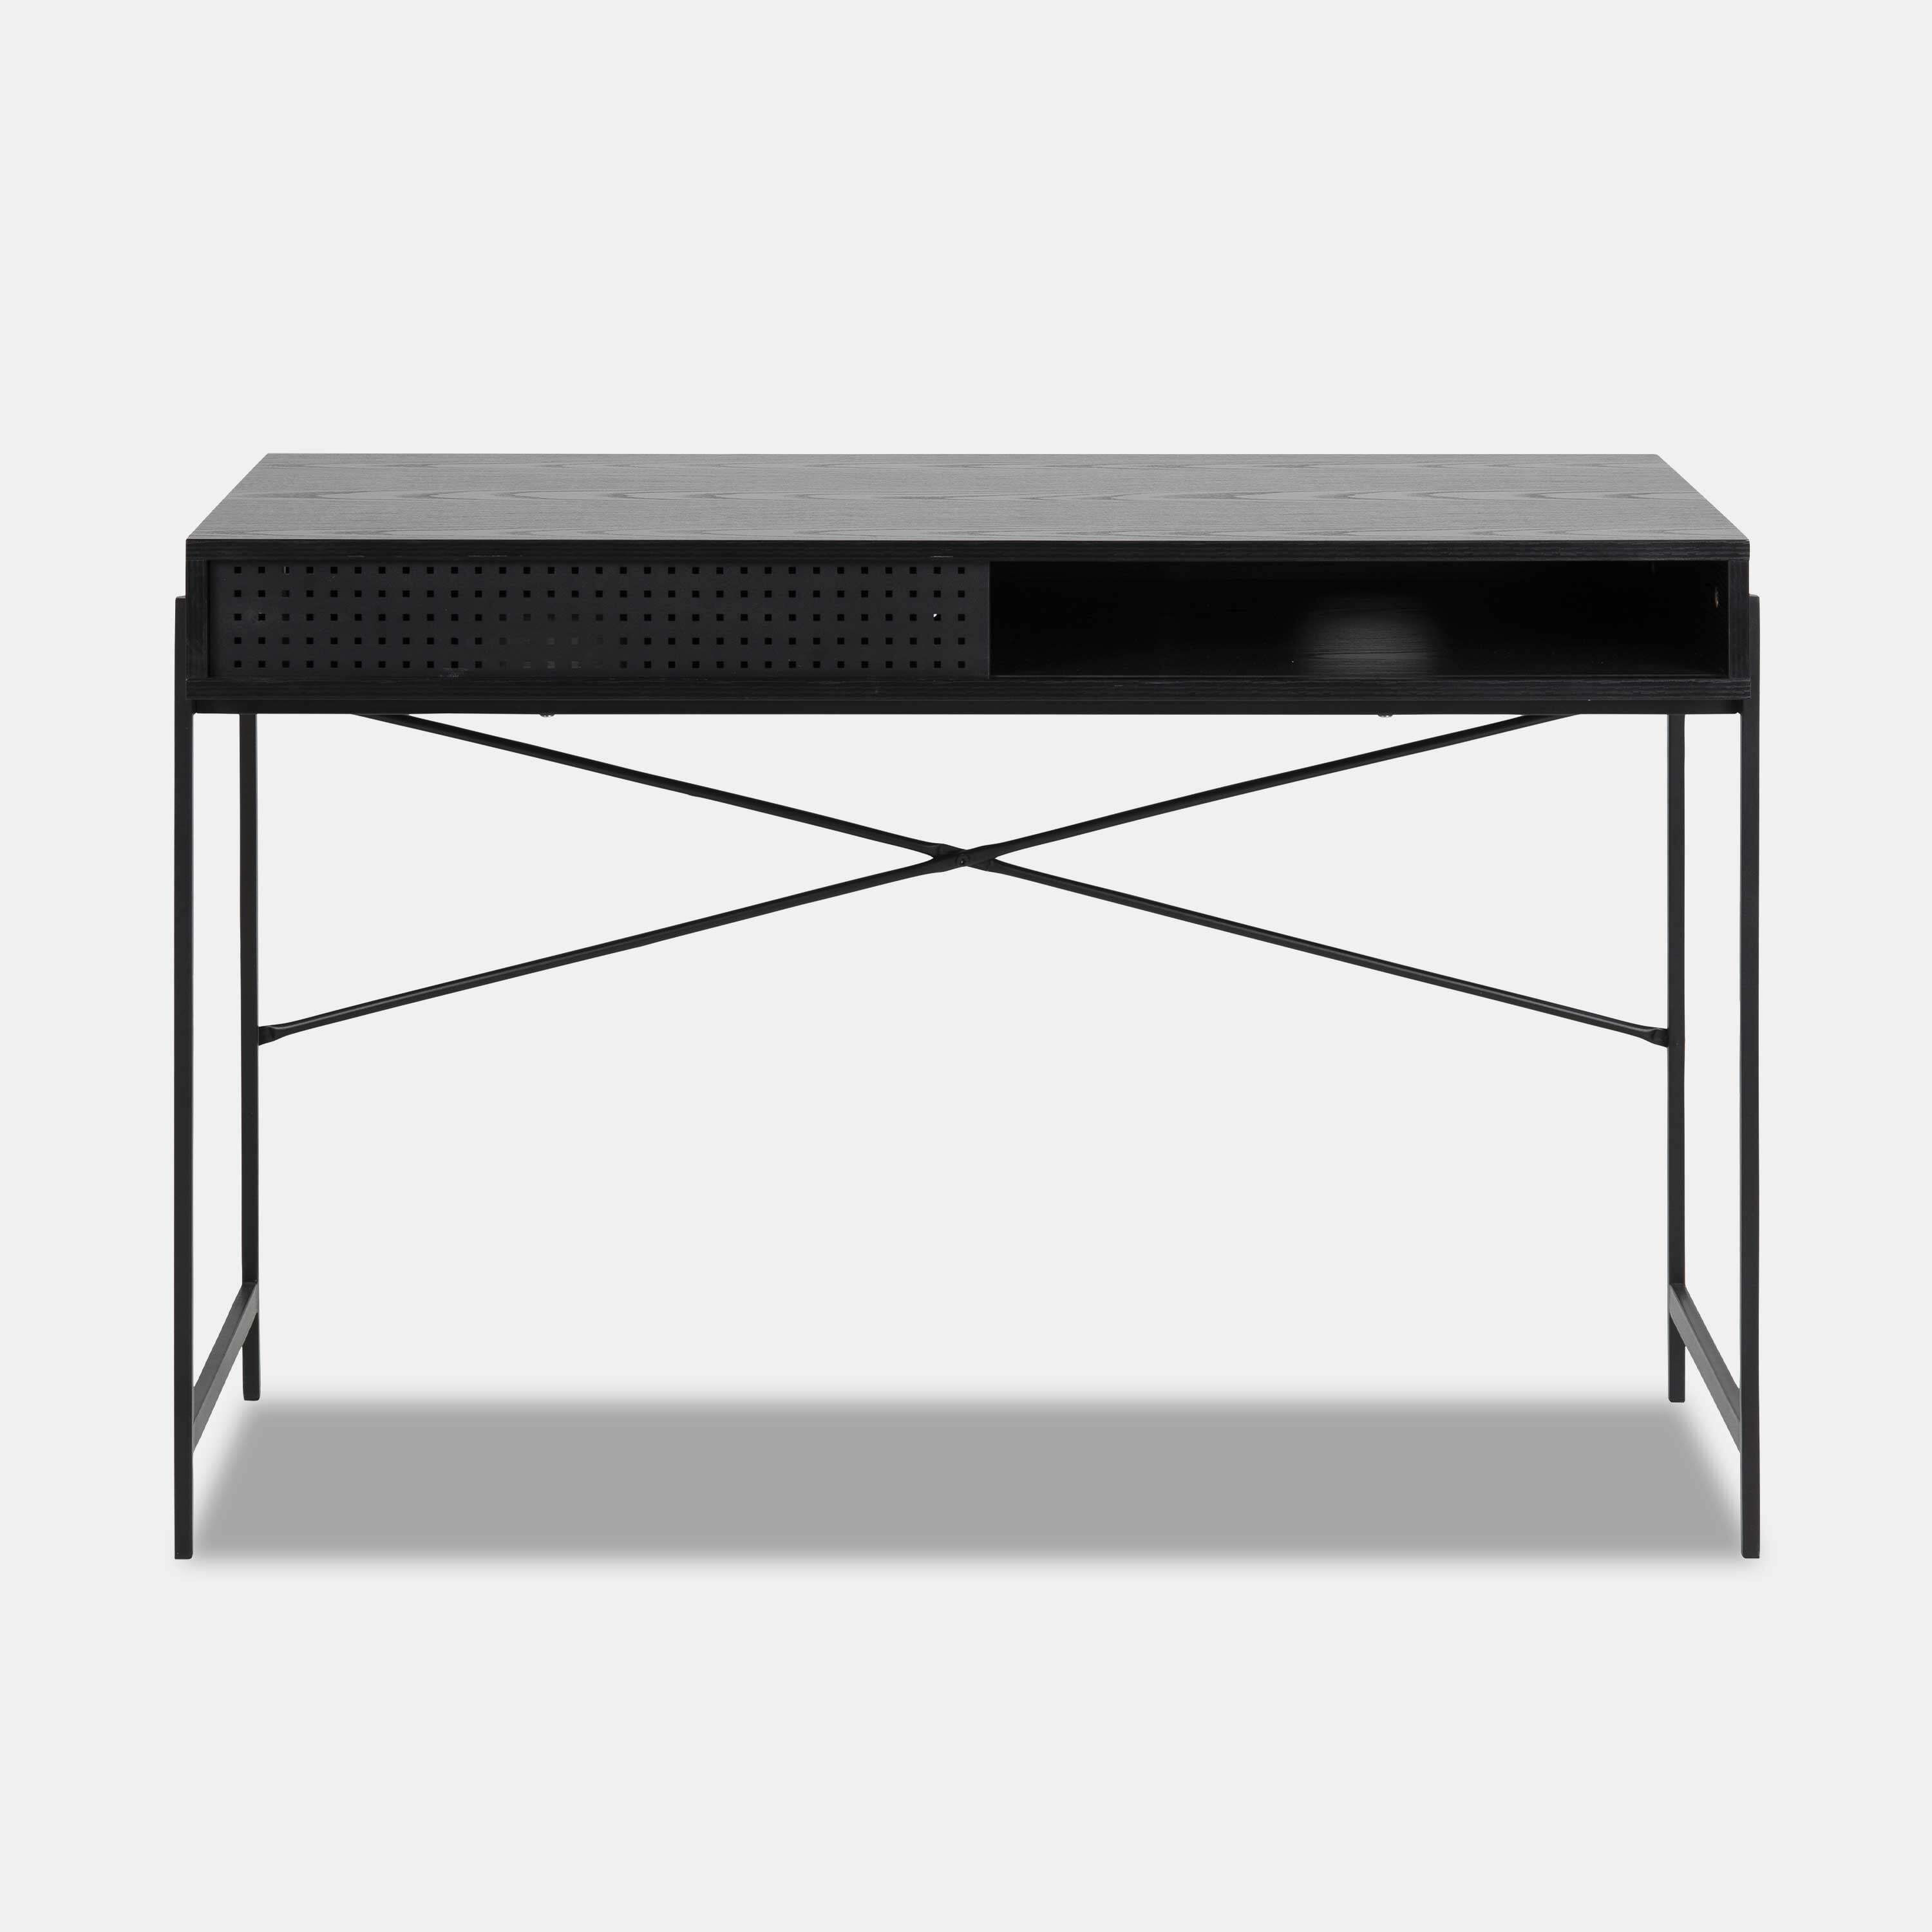 Black desk - modern black desk with drawers - DEXTER by housecosy - image 1